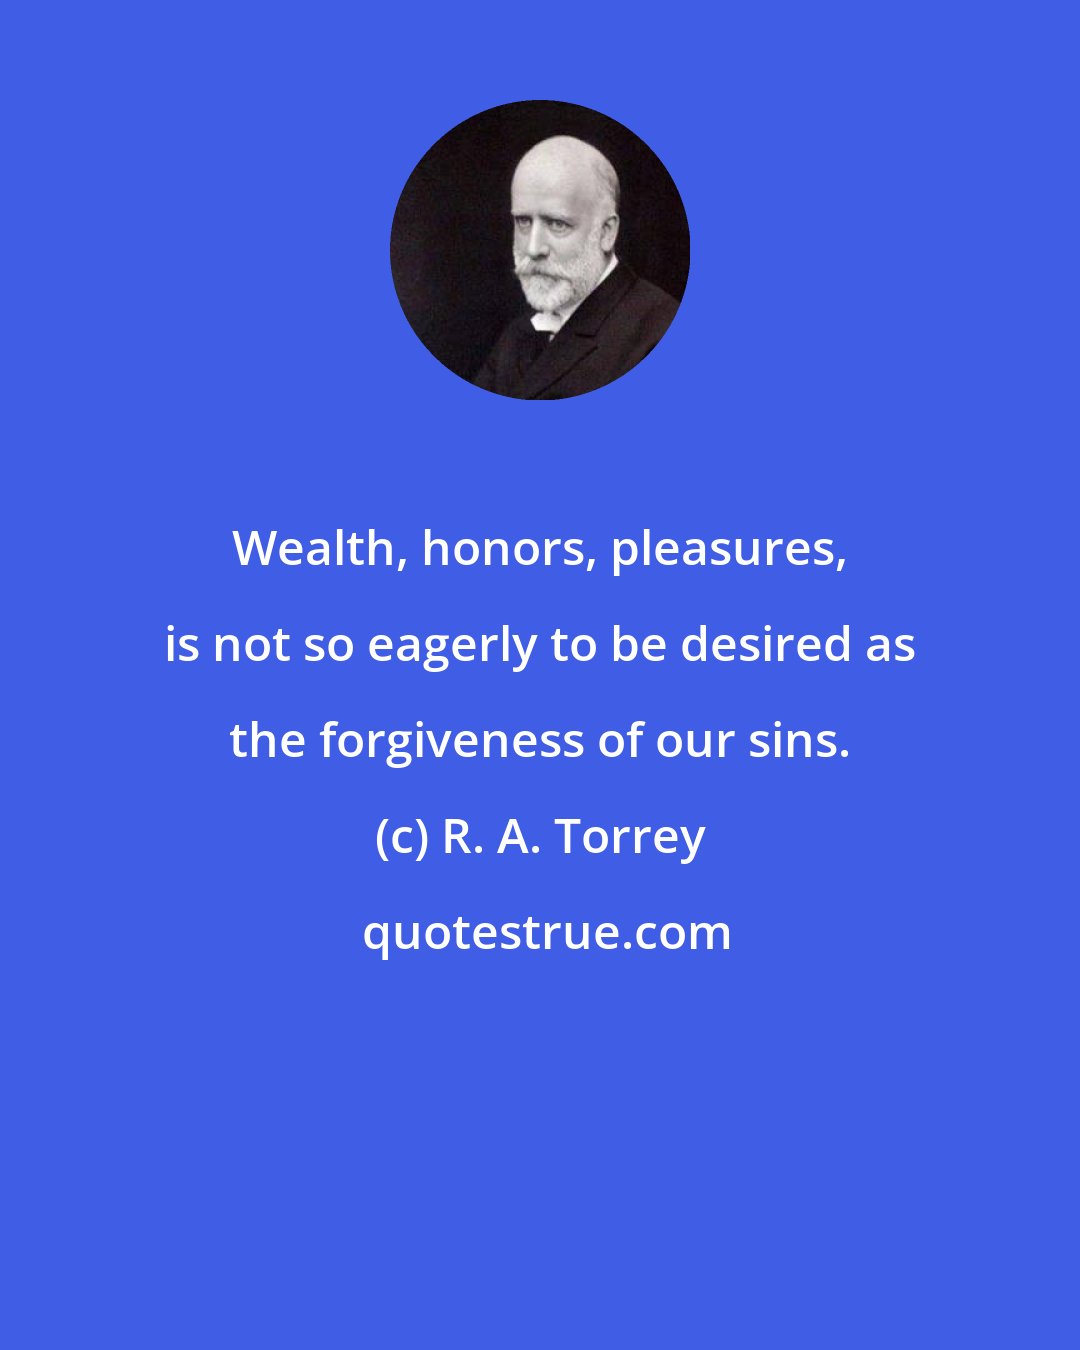 R. A. Torrey: Wealth, honors, pleasures, is not so eagerly to be desired as the forgiveness of our sins.